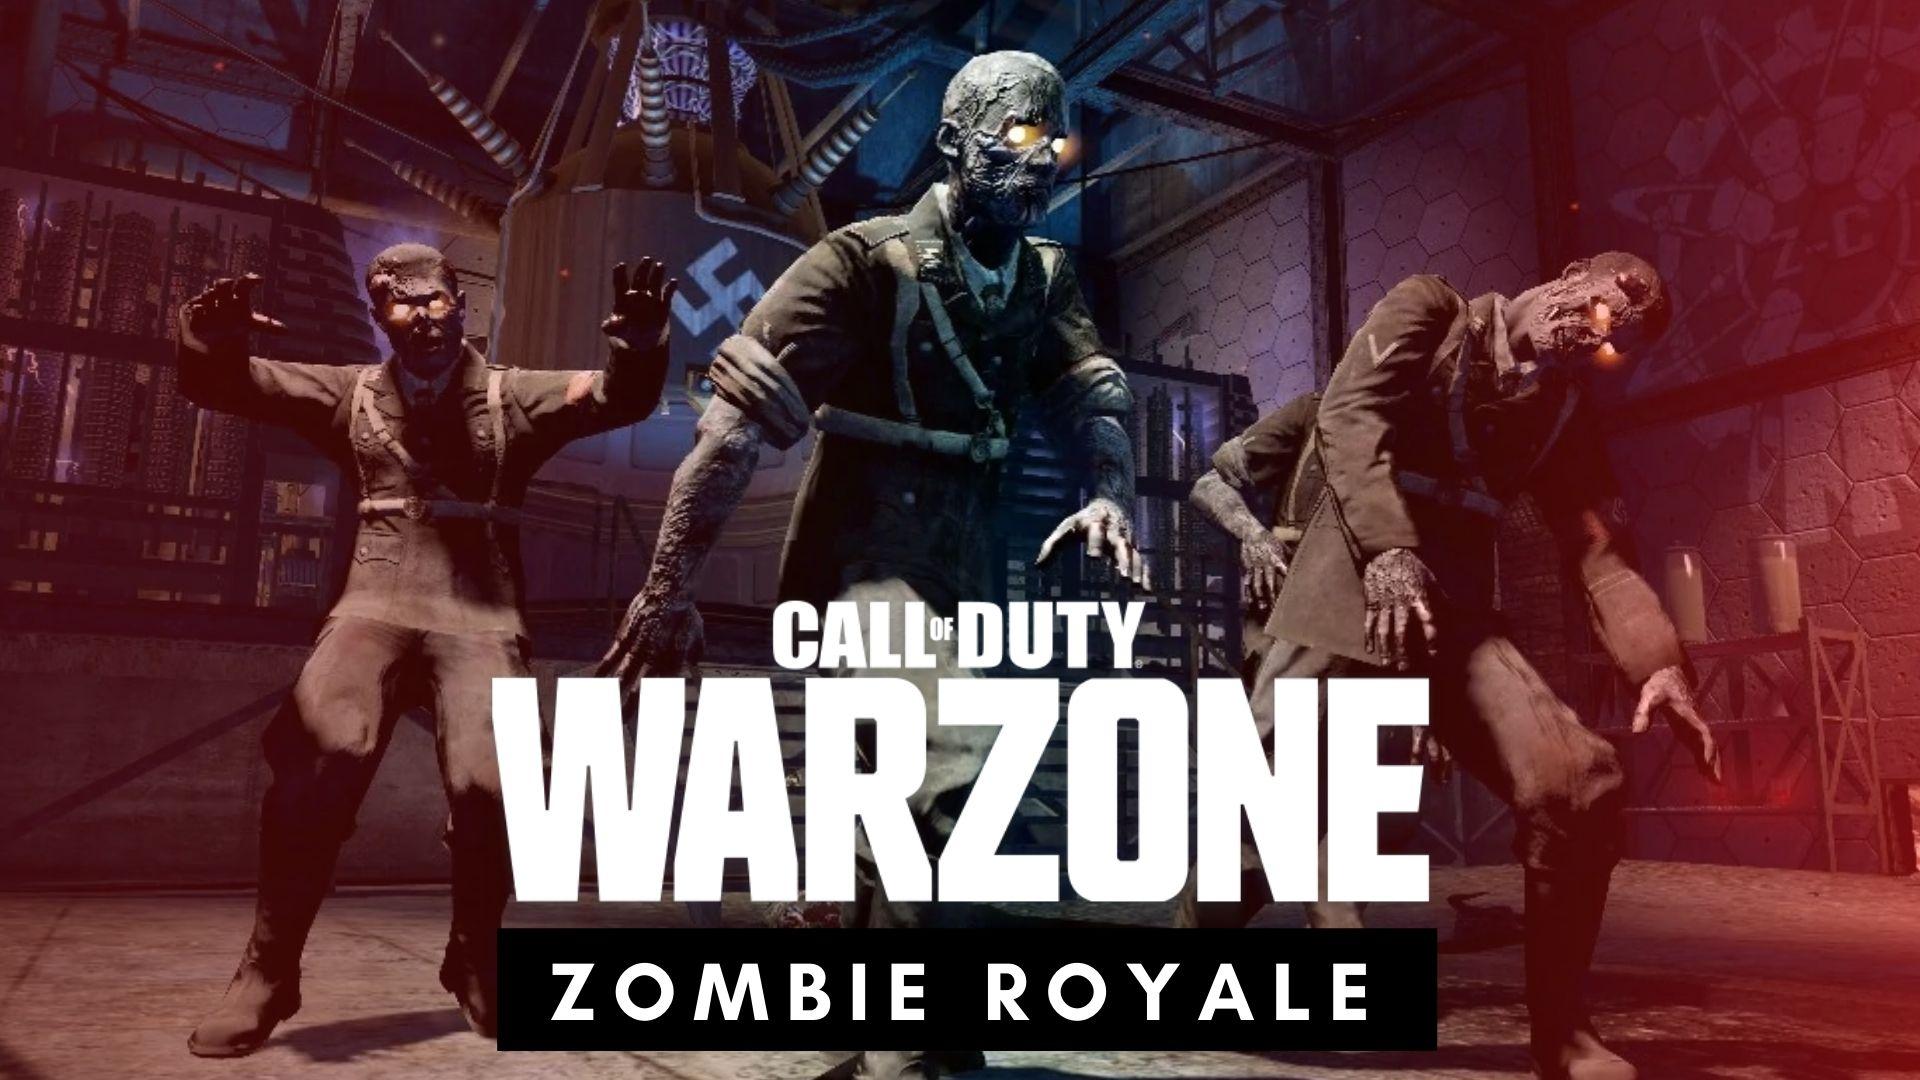 Call of Duty Warzone zombies